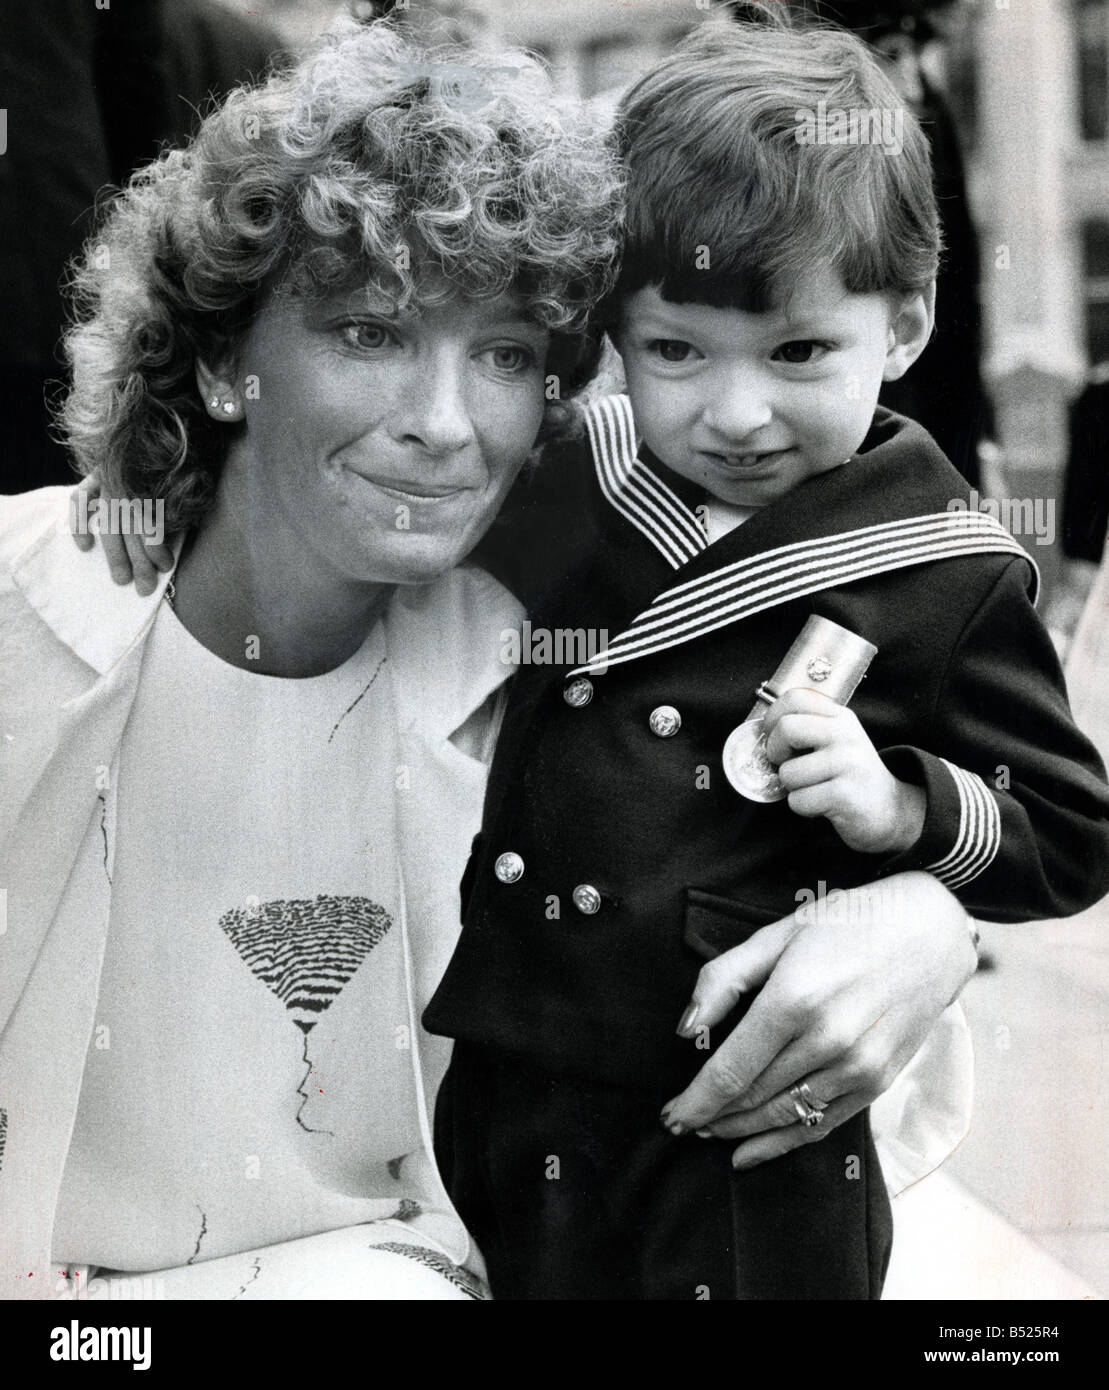 Falklands Memorial service at St.Pauls;Jean Stroud, whose husband was killed in the Falklands with her 31/2 year old son John Paul in a Naval Uniform and his Father's Falklands Campaign Medal.;4th June 1985 Stock Photo